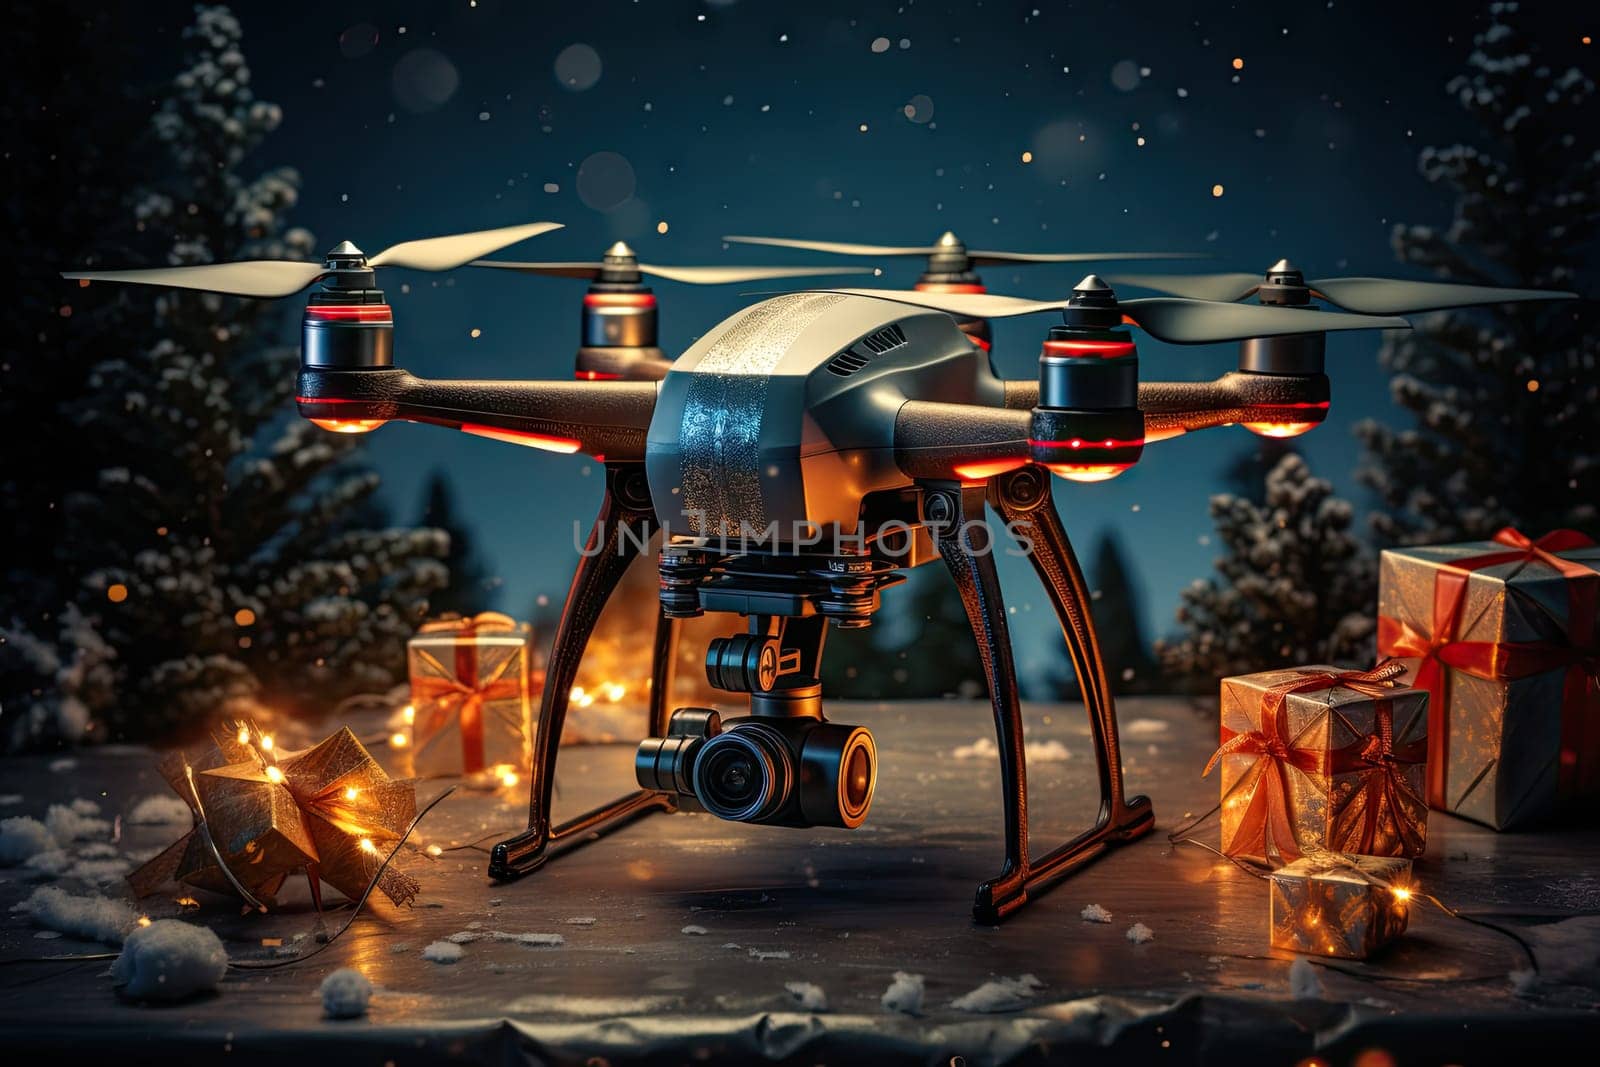 A Festive Christmas Scene with a Remote Controlled Flying Toy